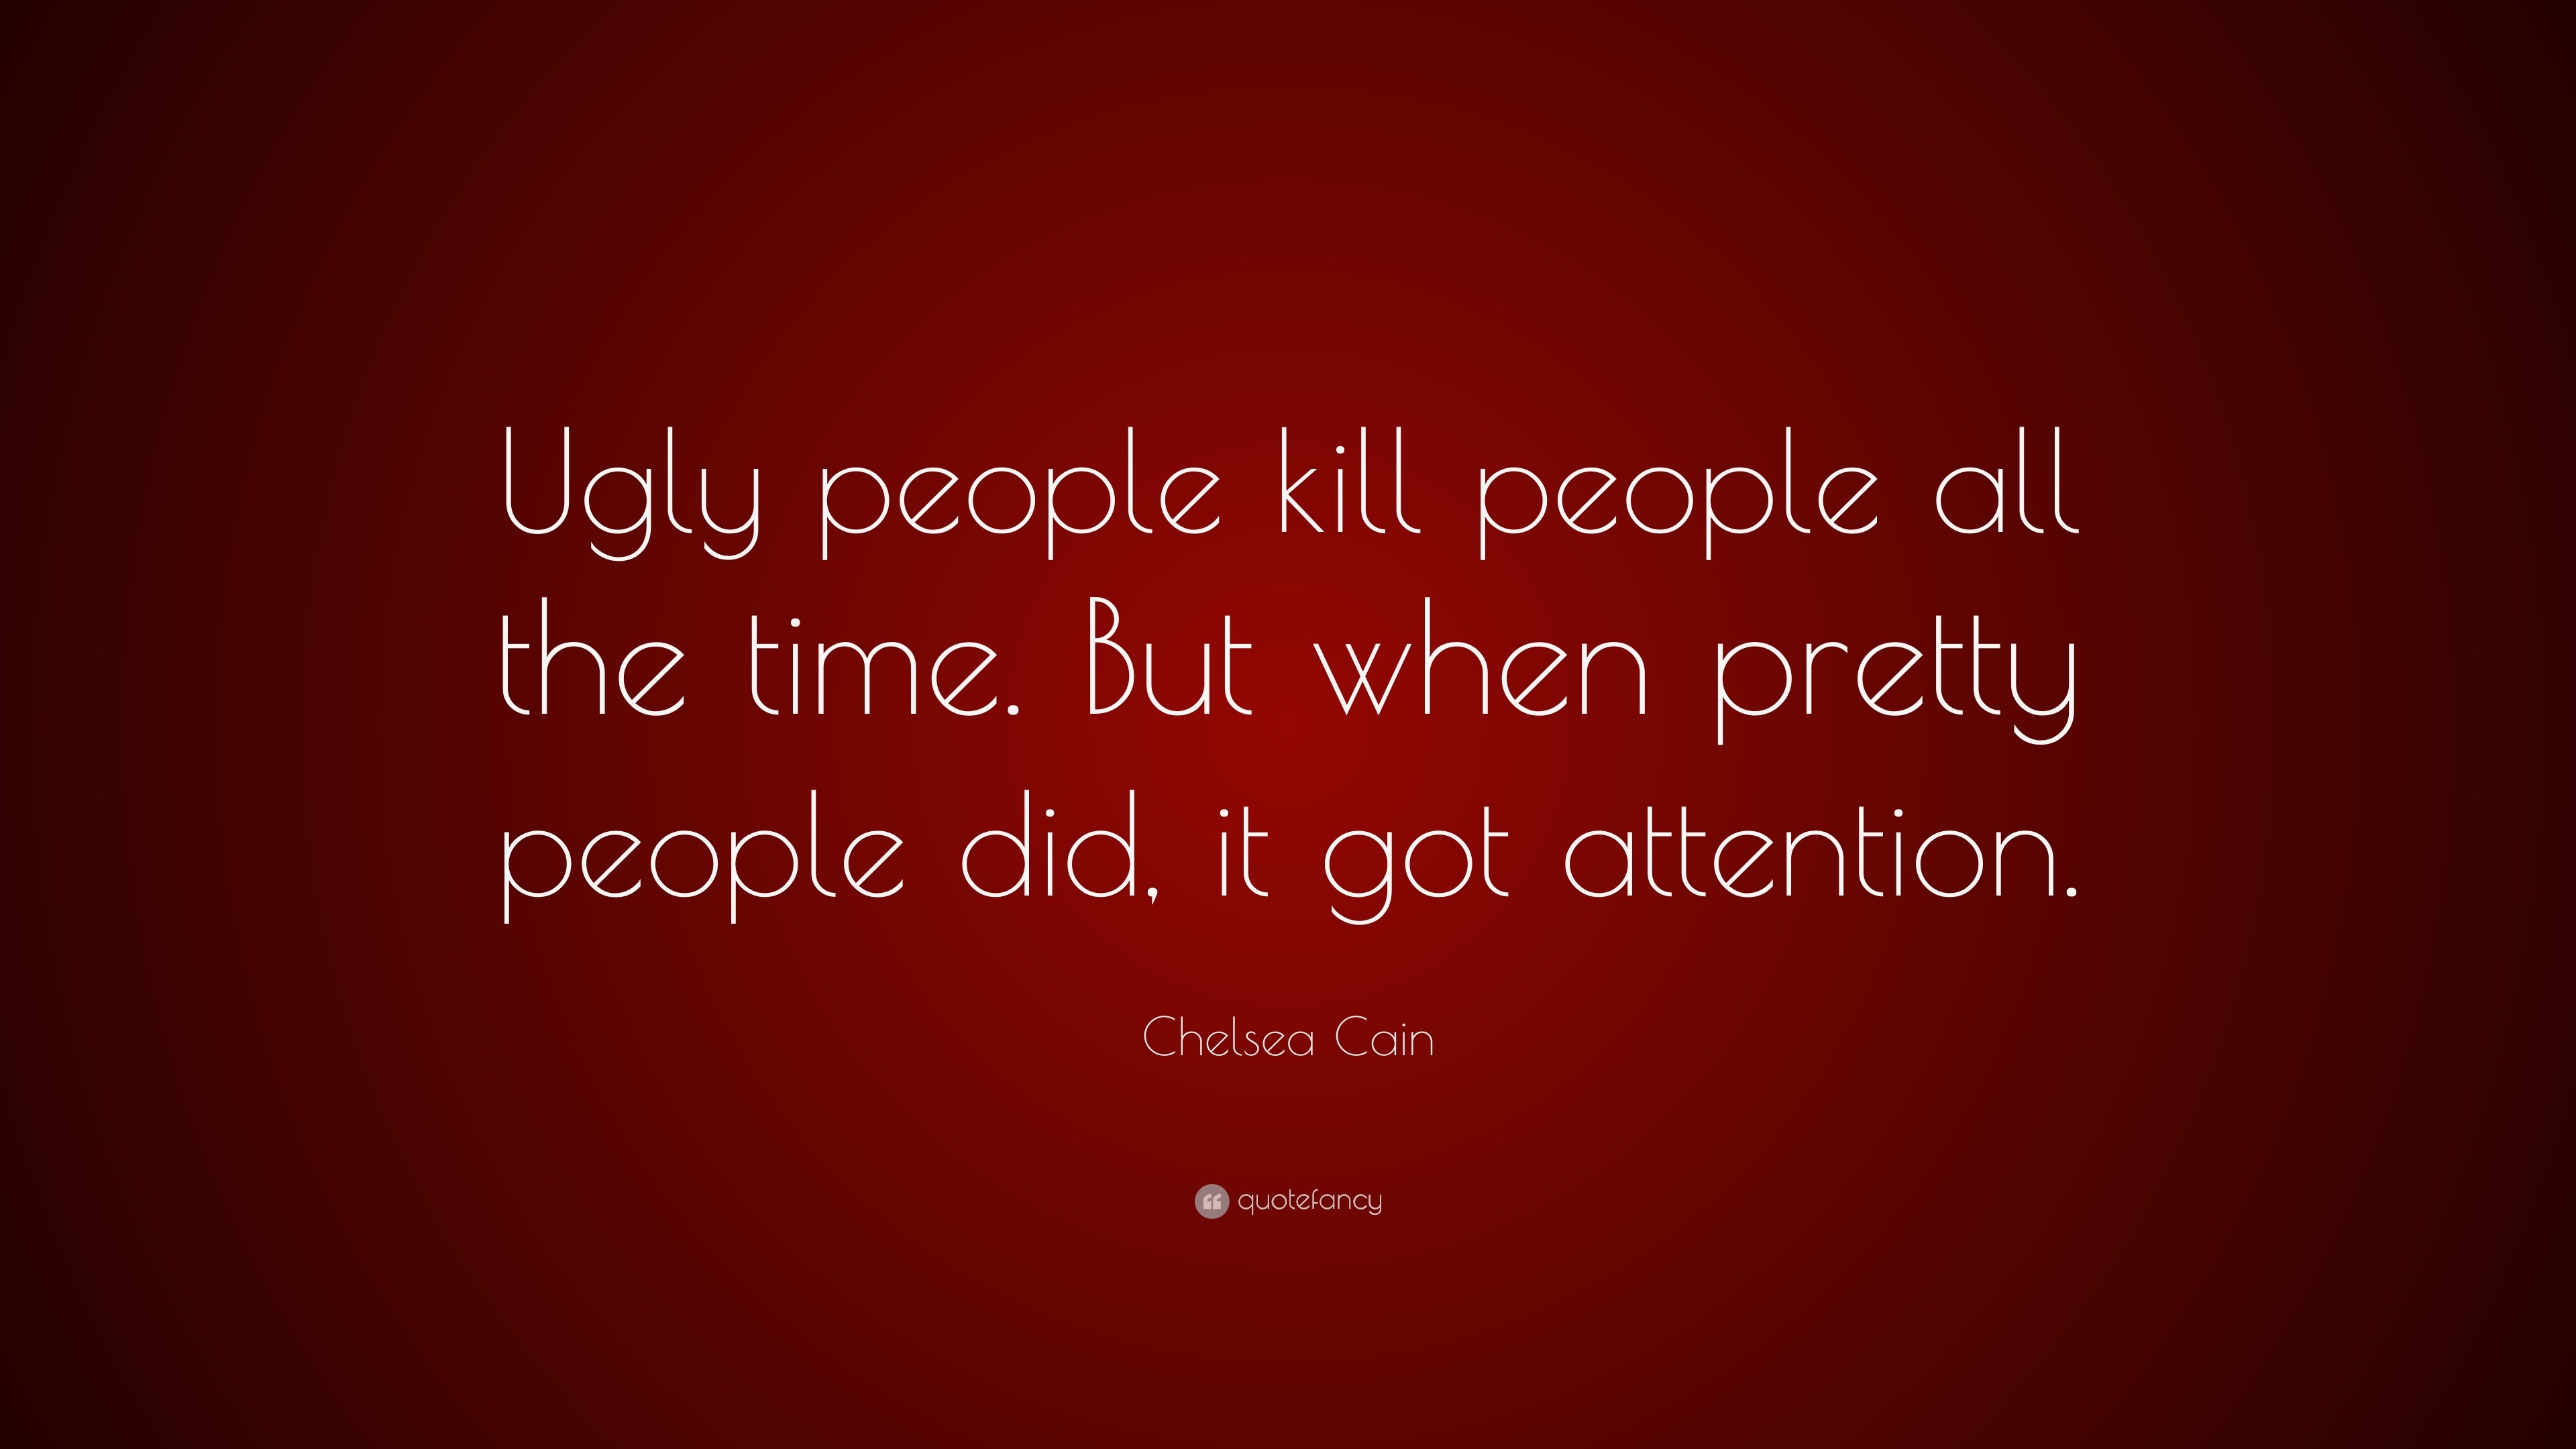 Chelsea Cain Quote “Ugly people kill people all the time. But when